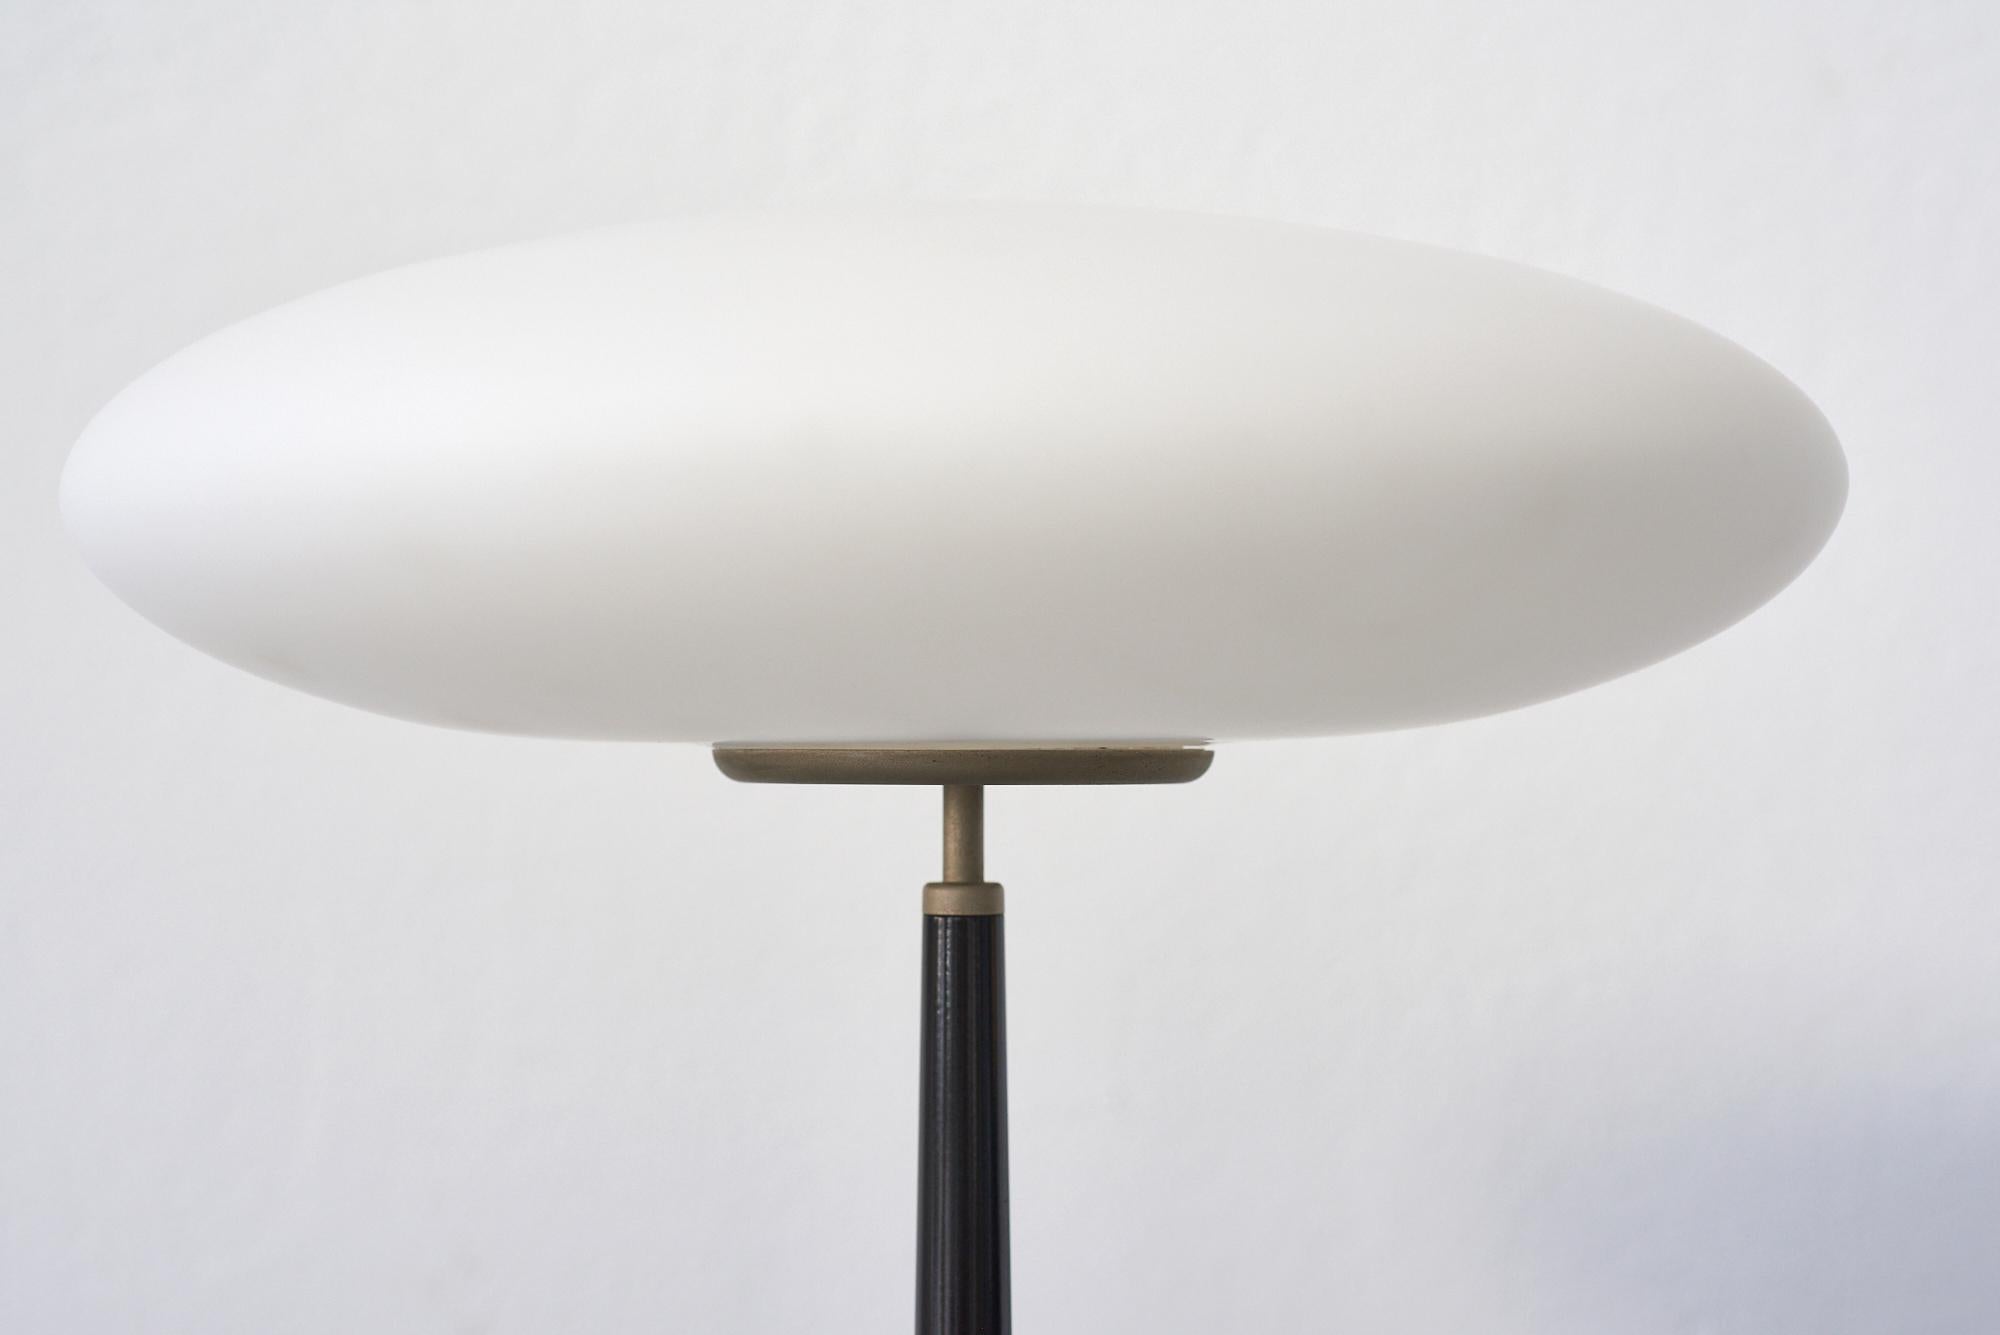 Modern Pao table lamp by Matteo Thun for Arteluce, 1993 For Sale